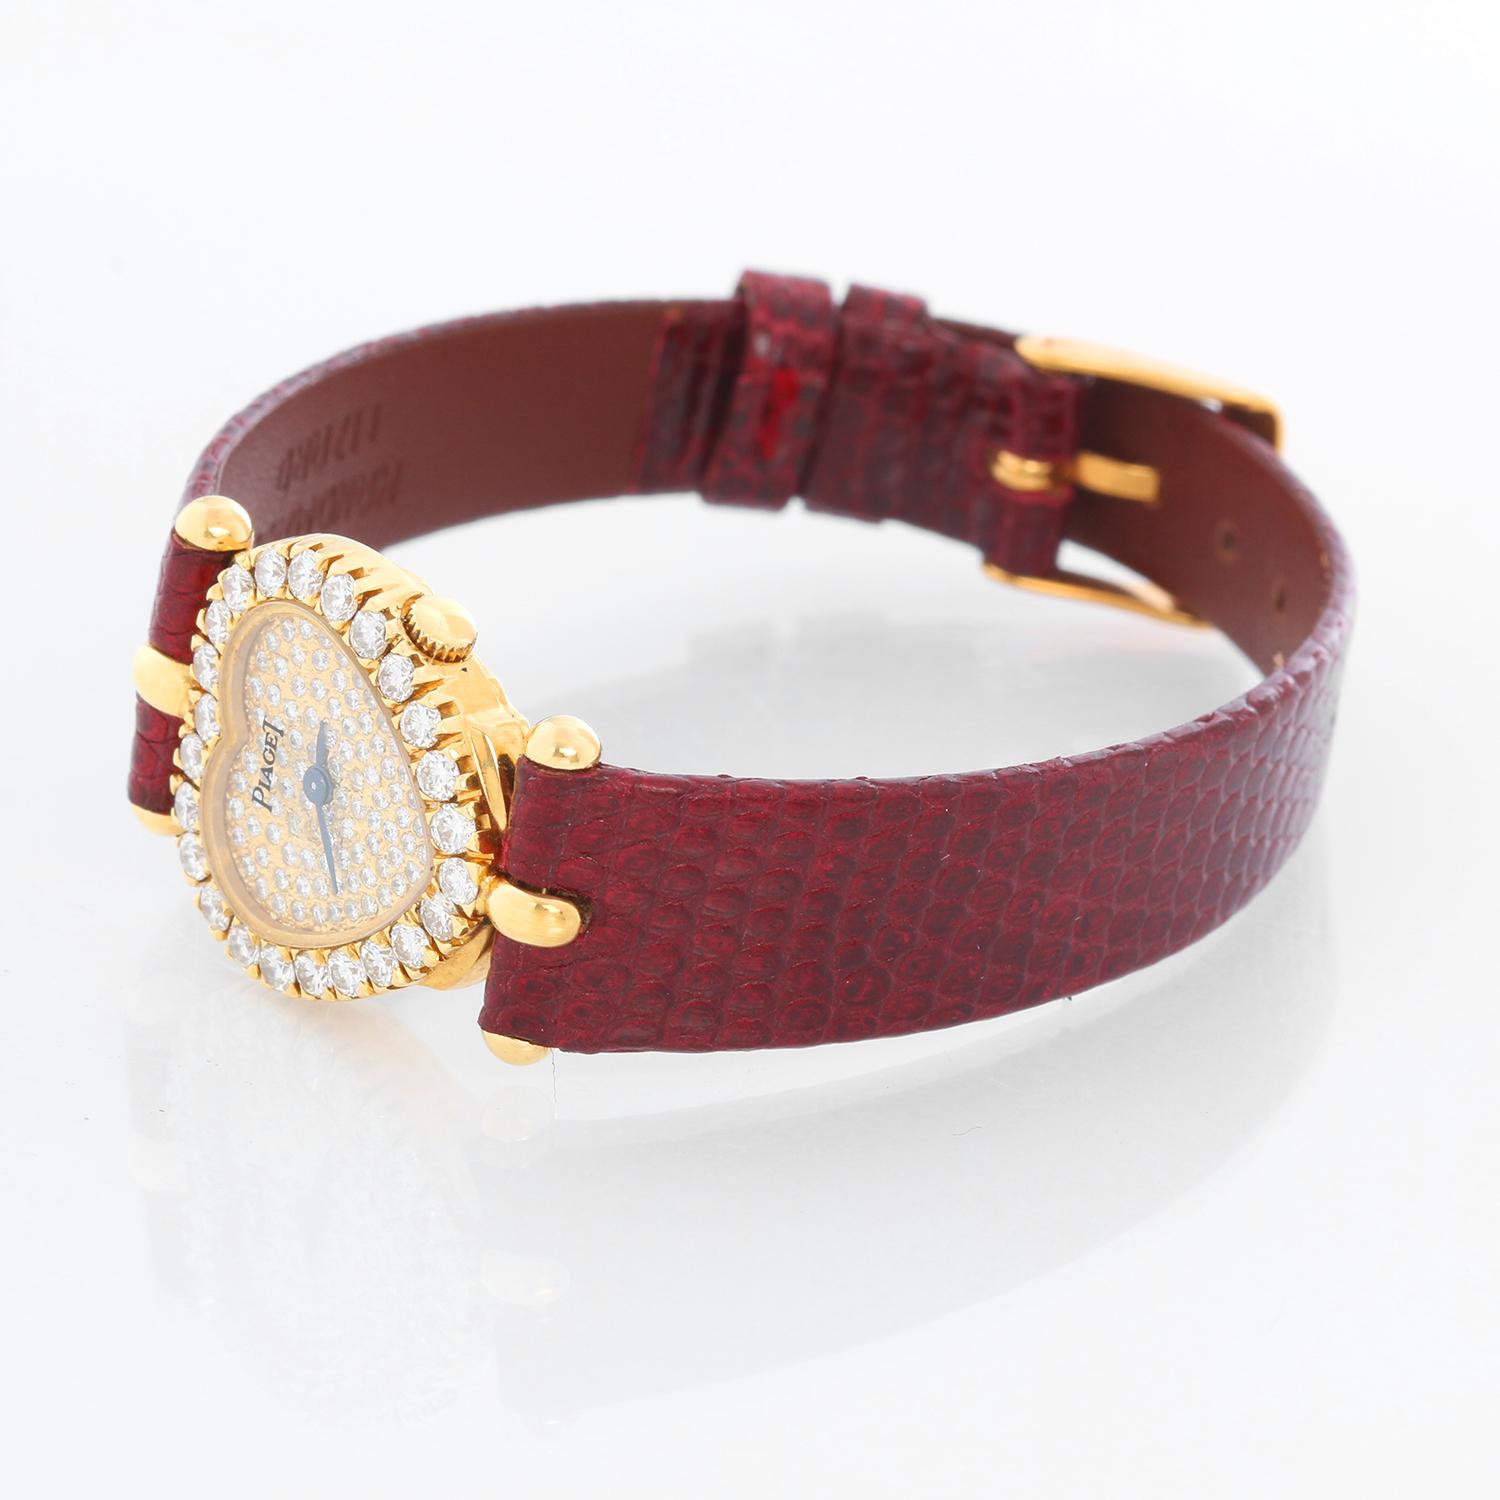 Piaget 18K Yellow Gold Heart Shaped Watch - Quartz. 18K Yellow gold with diamond bezel; 24 Factory Set Diamonds ( 20 mm ). Pave diamond dial; 93 Factory Set Pavé-Set Diamond Dial. Burgundy leather  strap with gold color buckle. Pre-owned with Piaget